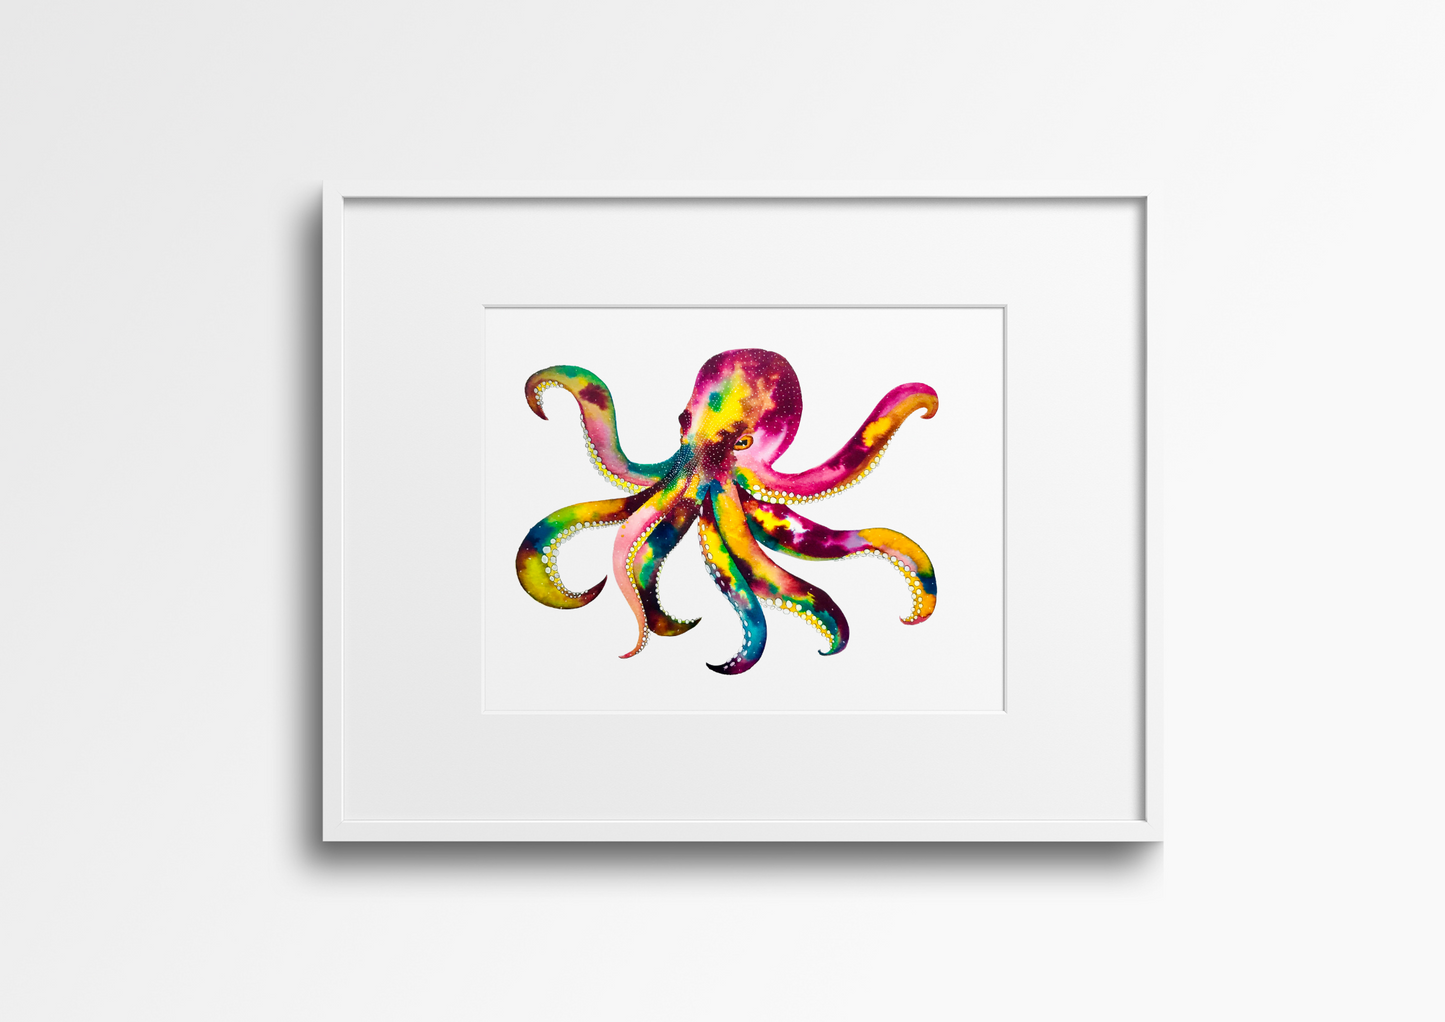 Octopus Framed Watercolour Painting